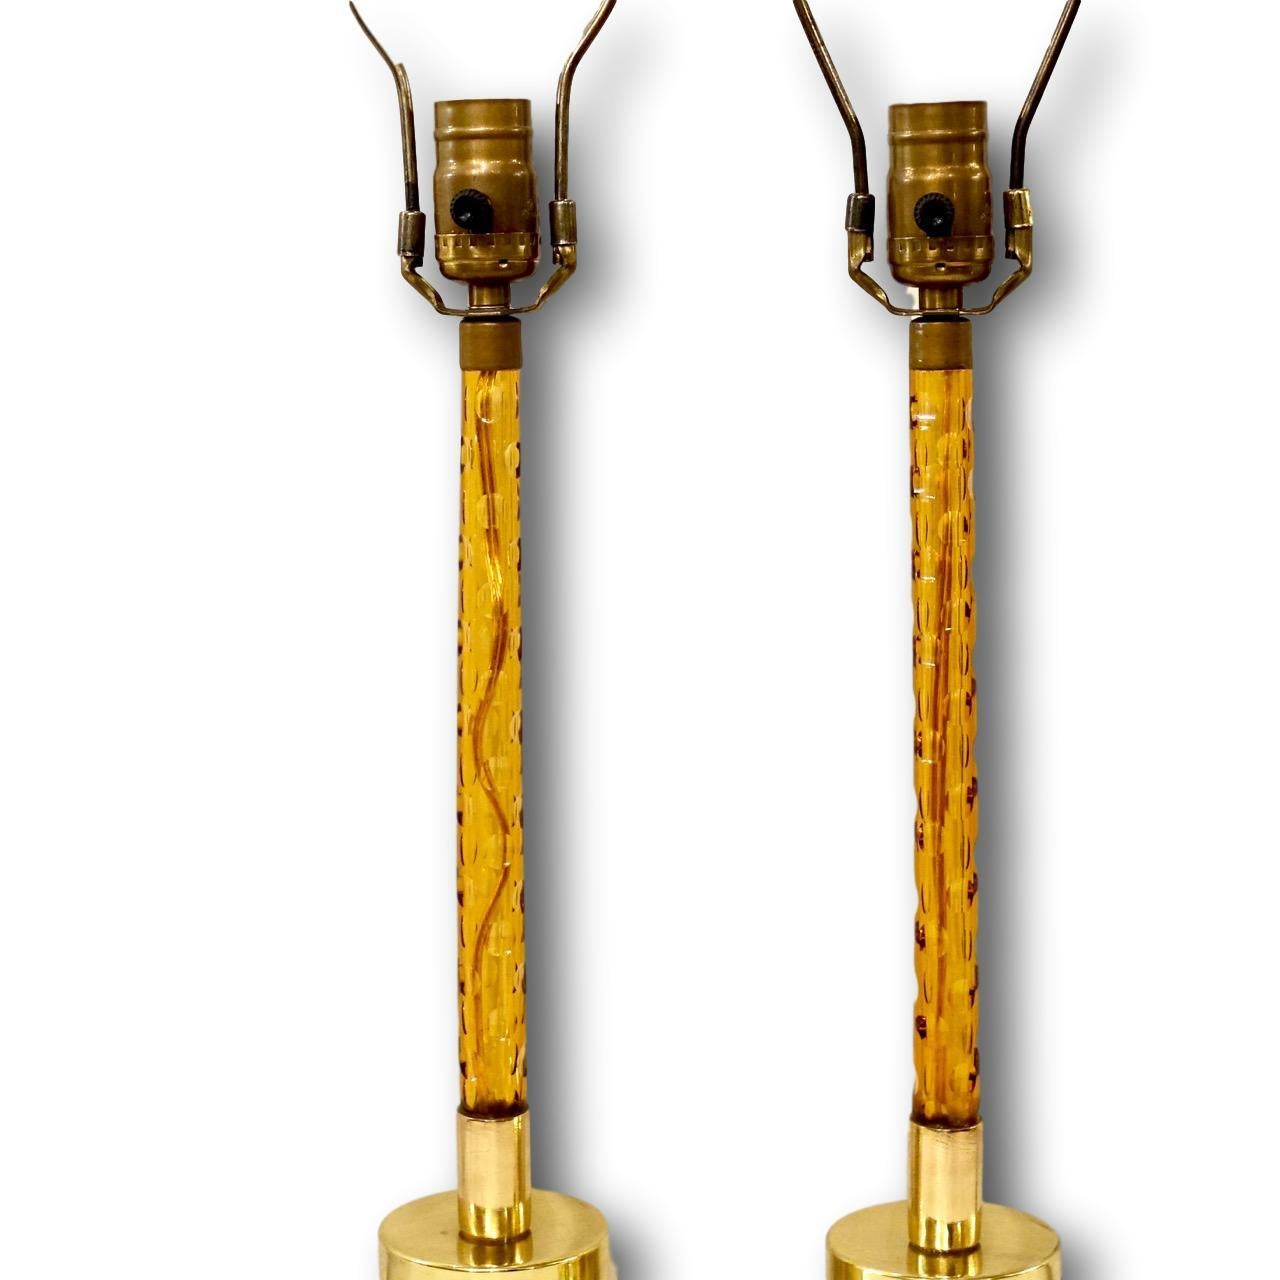 A pair of circa 1940s French amber tone cut-glass stem lamps with bronze bases. 

Measurements:
Height of body 16